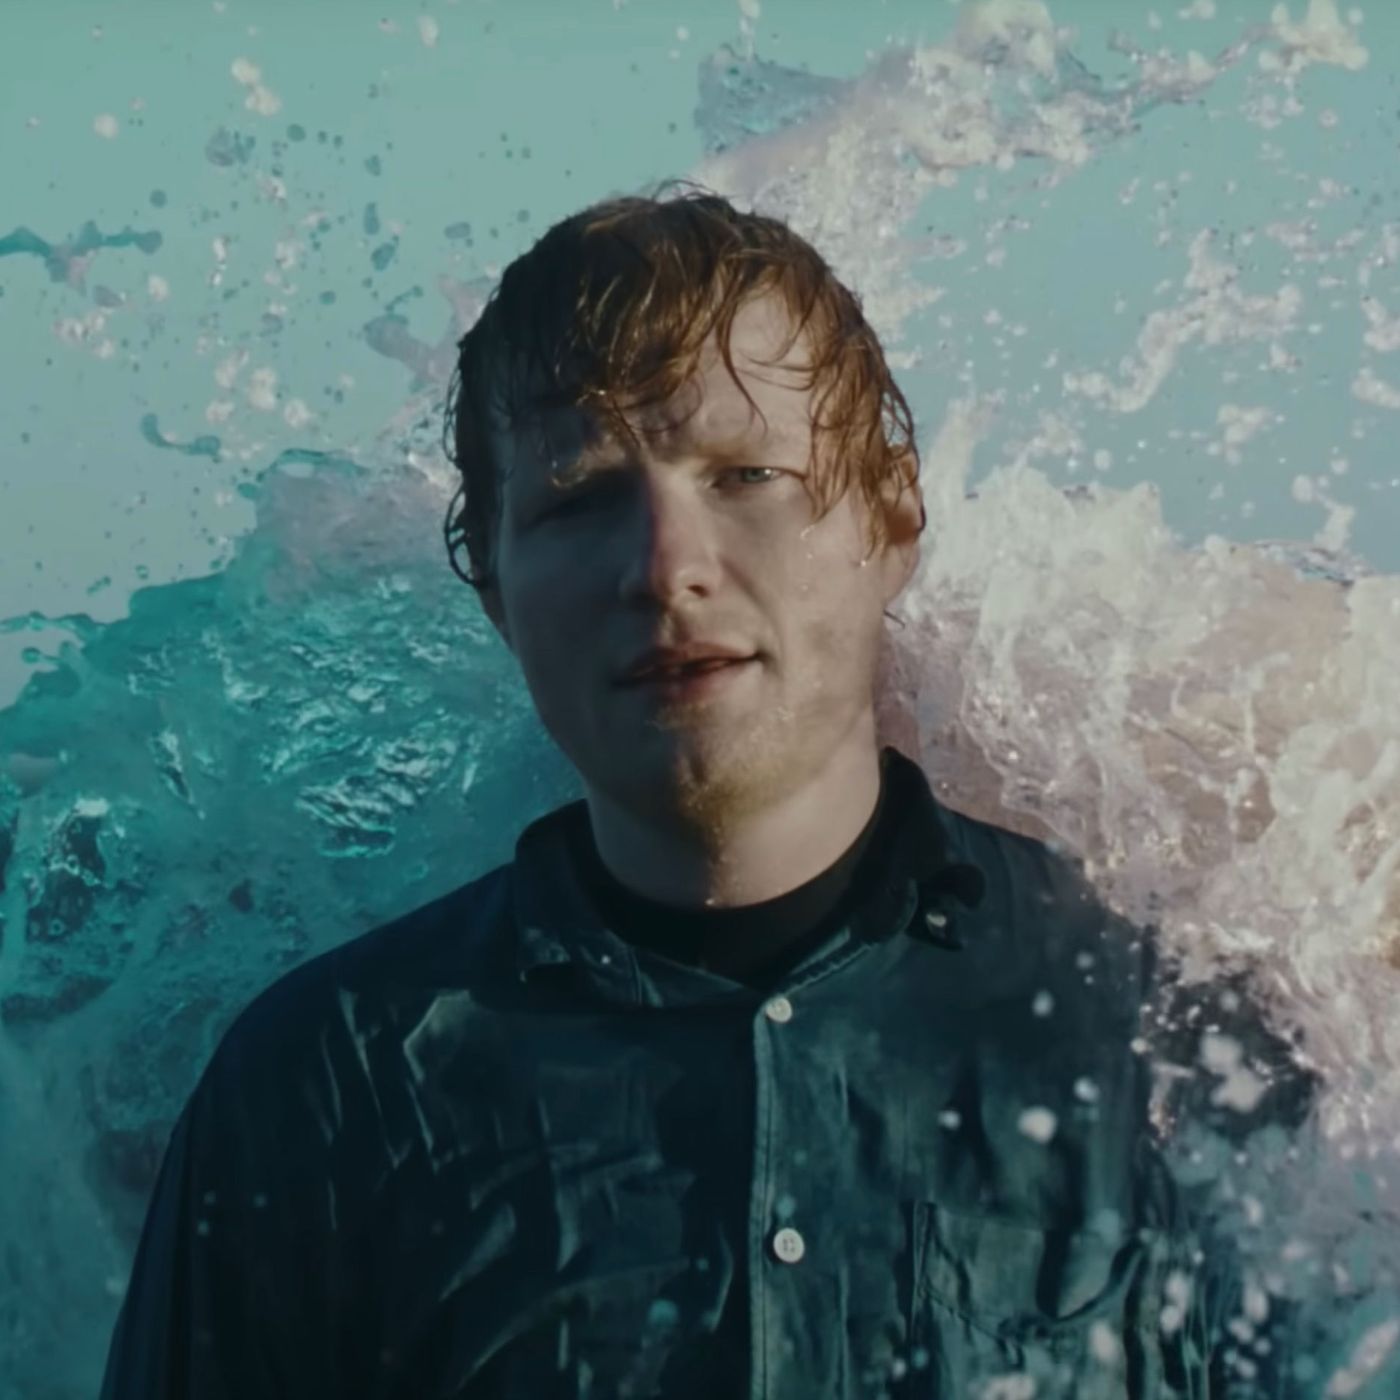 Ed Sheeran to release new album '-' in May